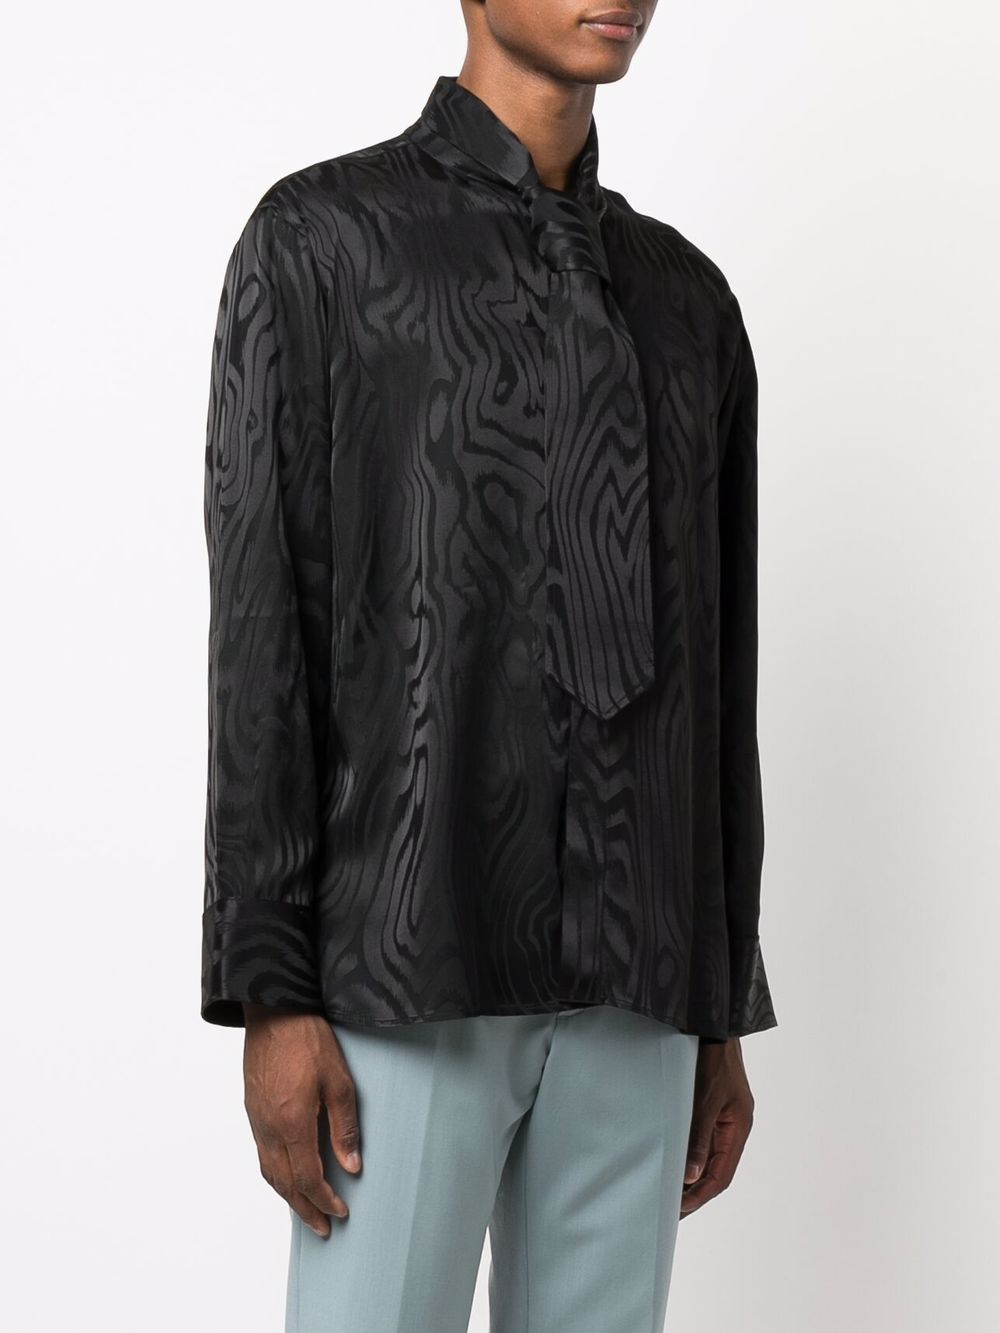 Opening Ceremony Heartwood Tie long-sleeve Shirt - Farfetch